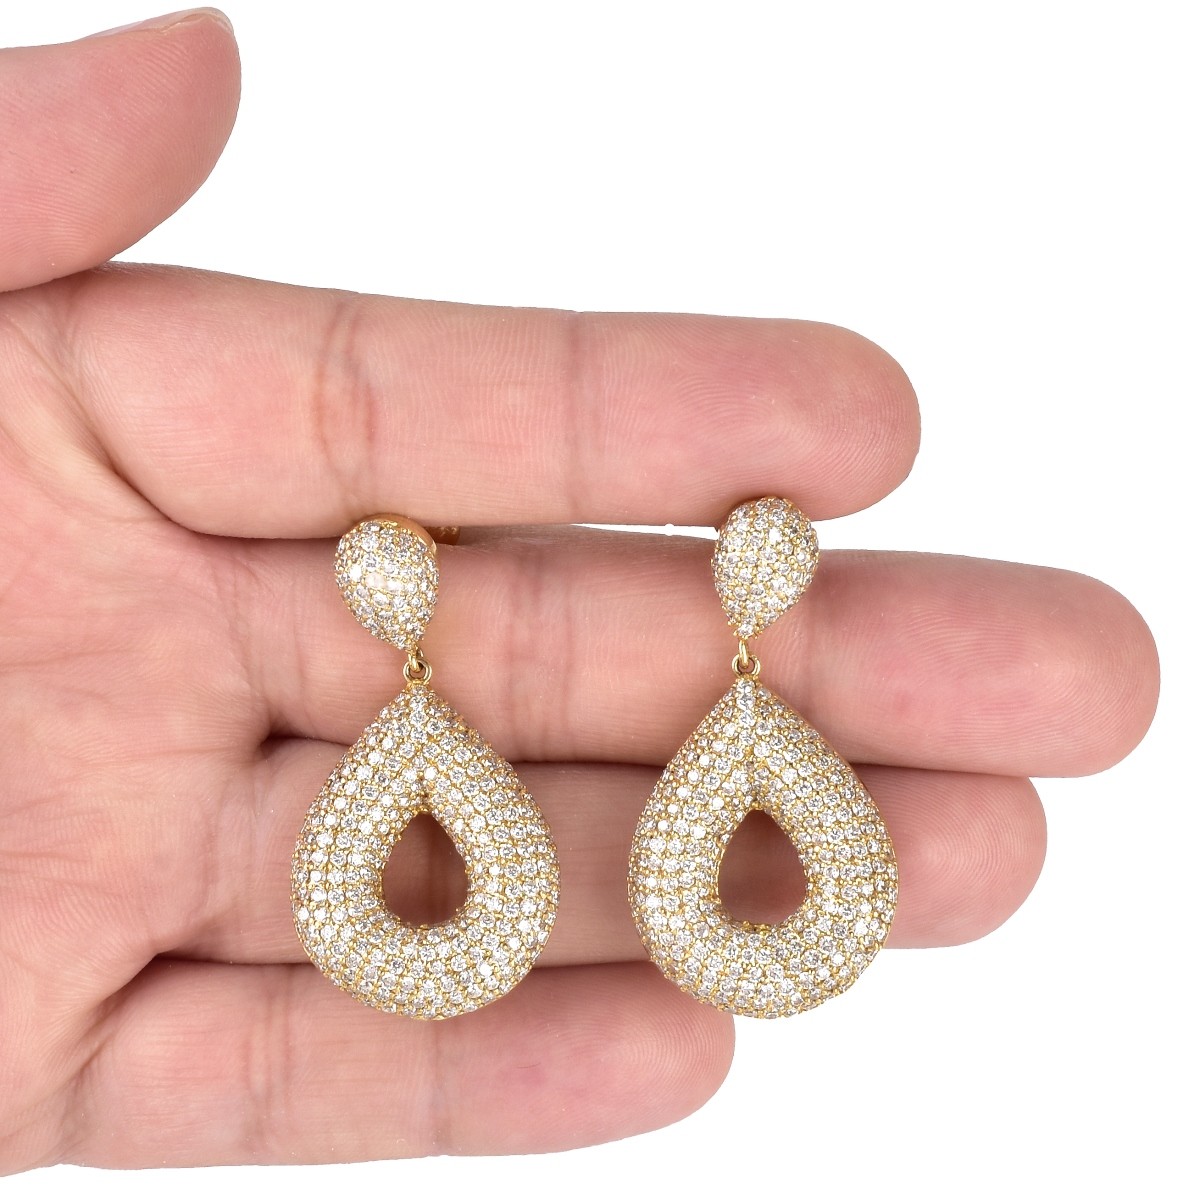 Diamond and 14K Gold Earrings - Image 5 of 5